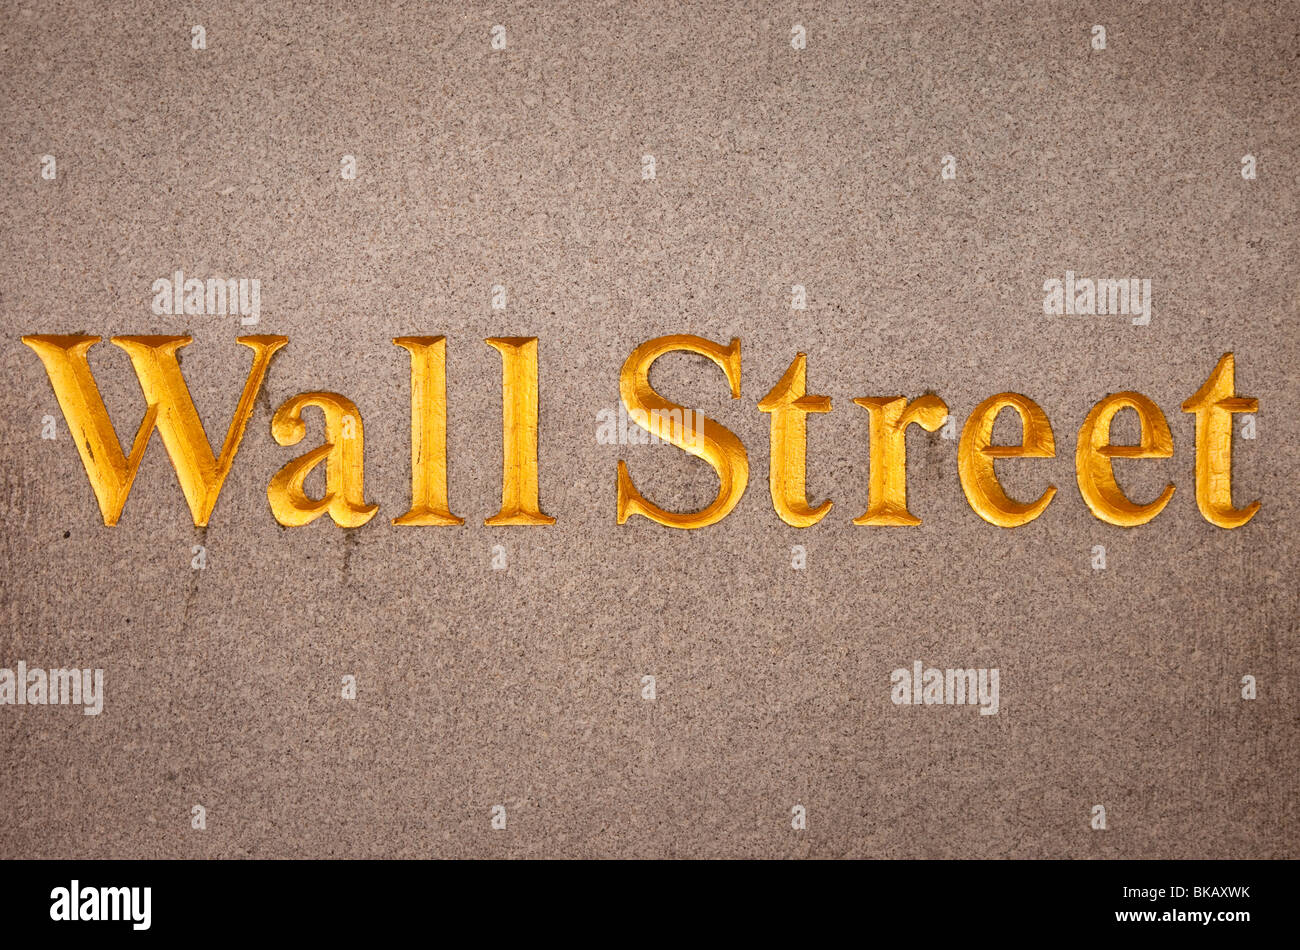 Wall Street sign engraved on the wall of a bank building along Wall Street, Lower Manhattan, New York City USA Stock Photo